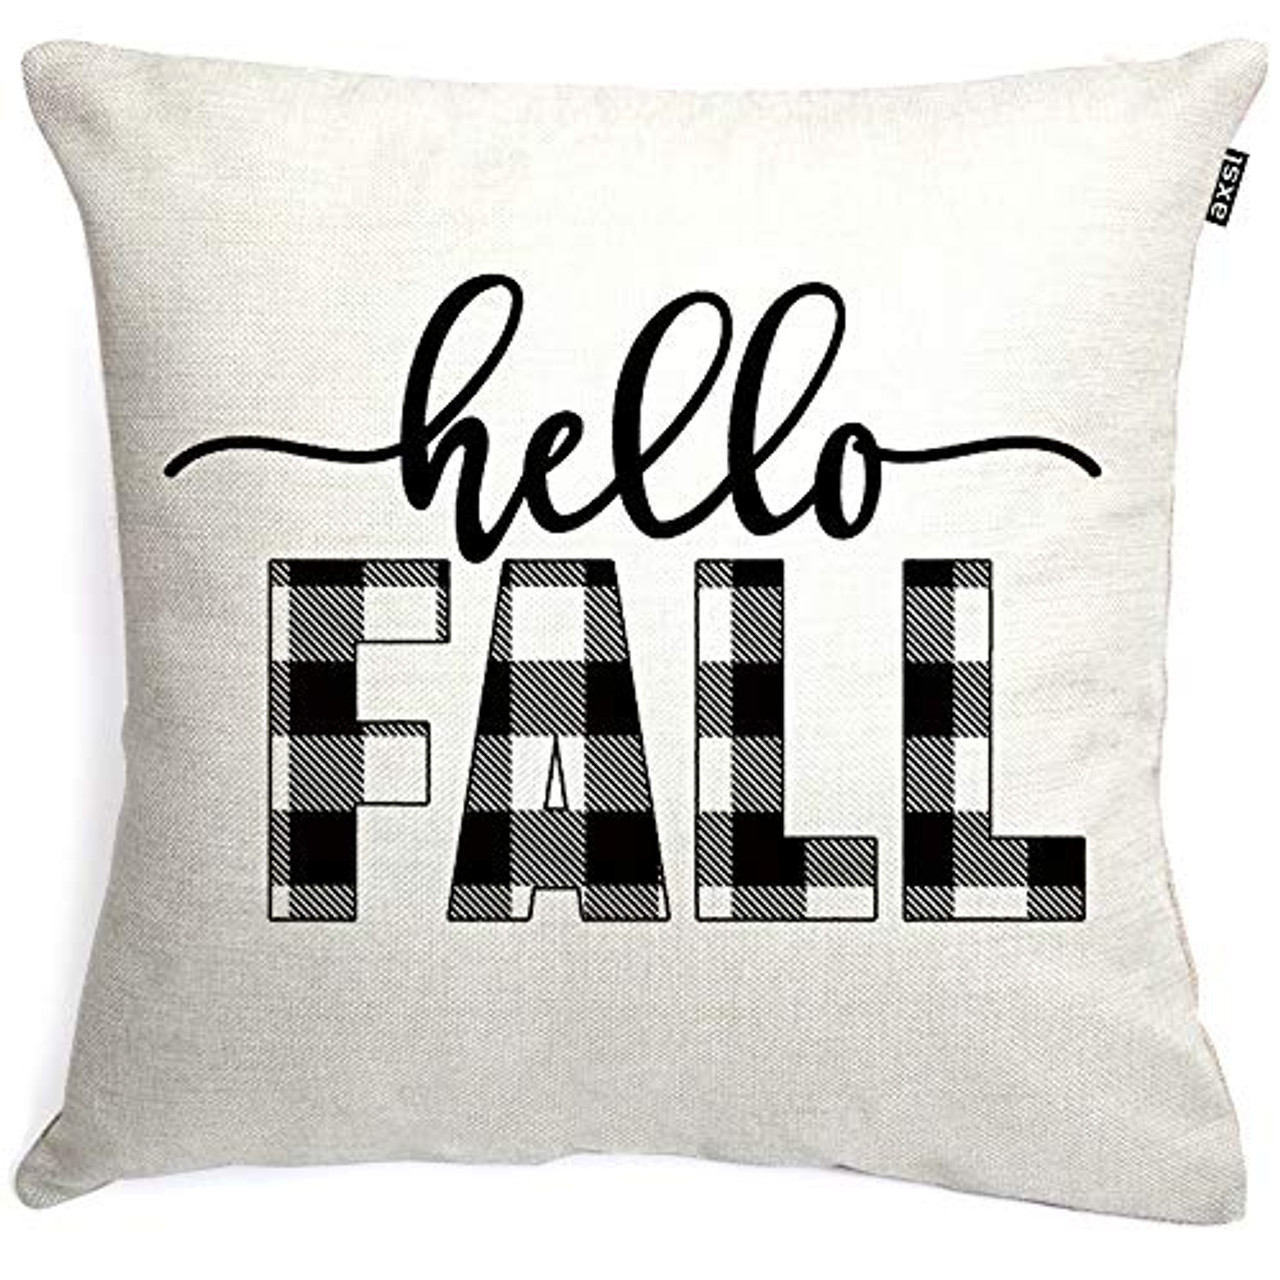 Details about   Hello Fall Pillow Cover 